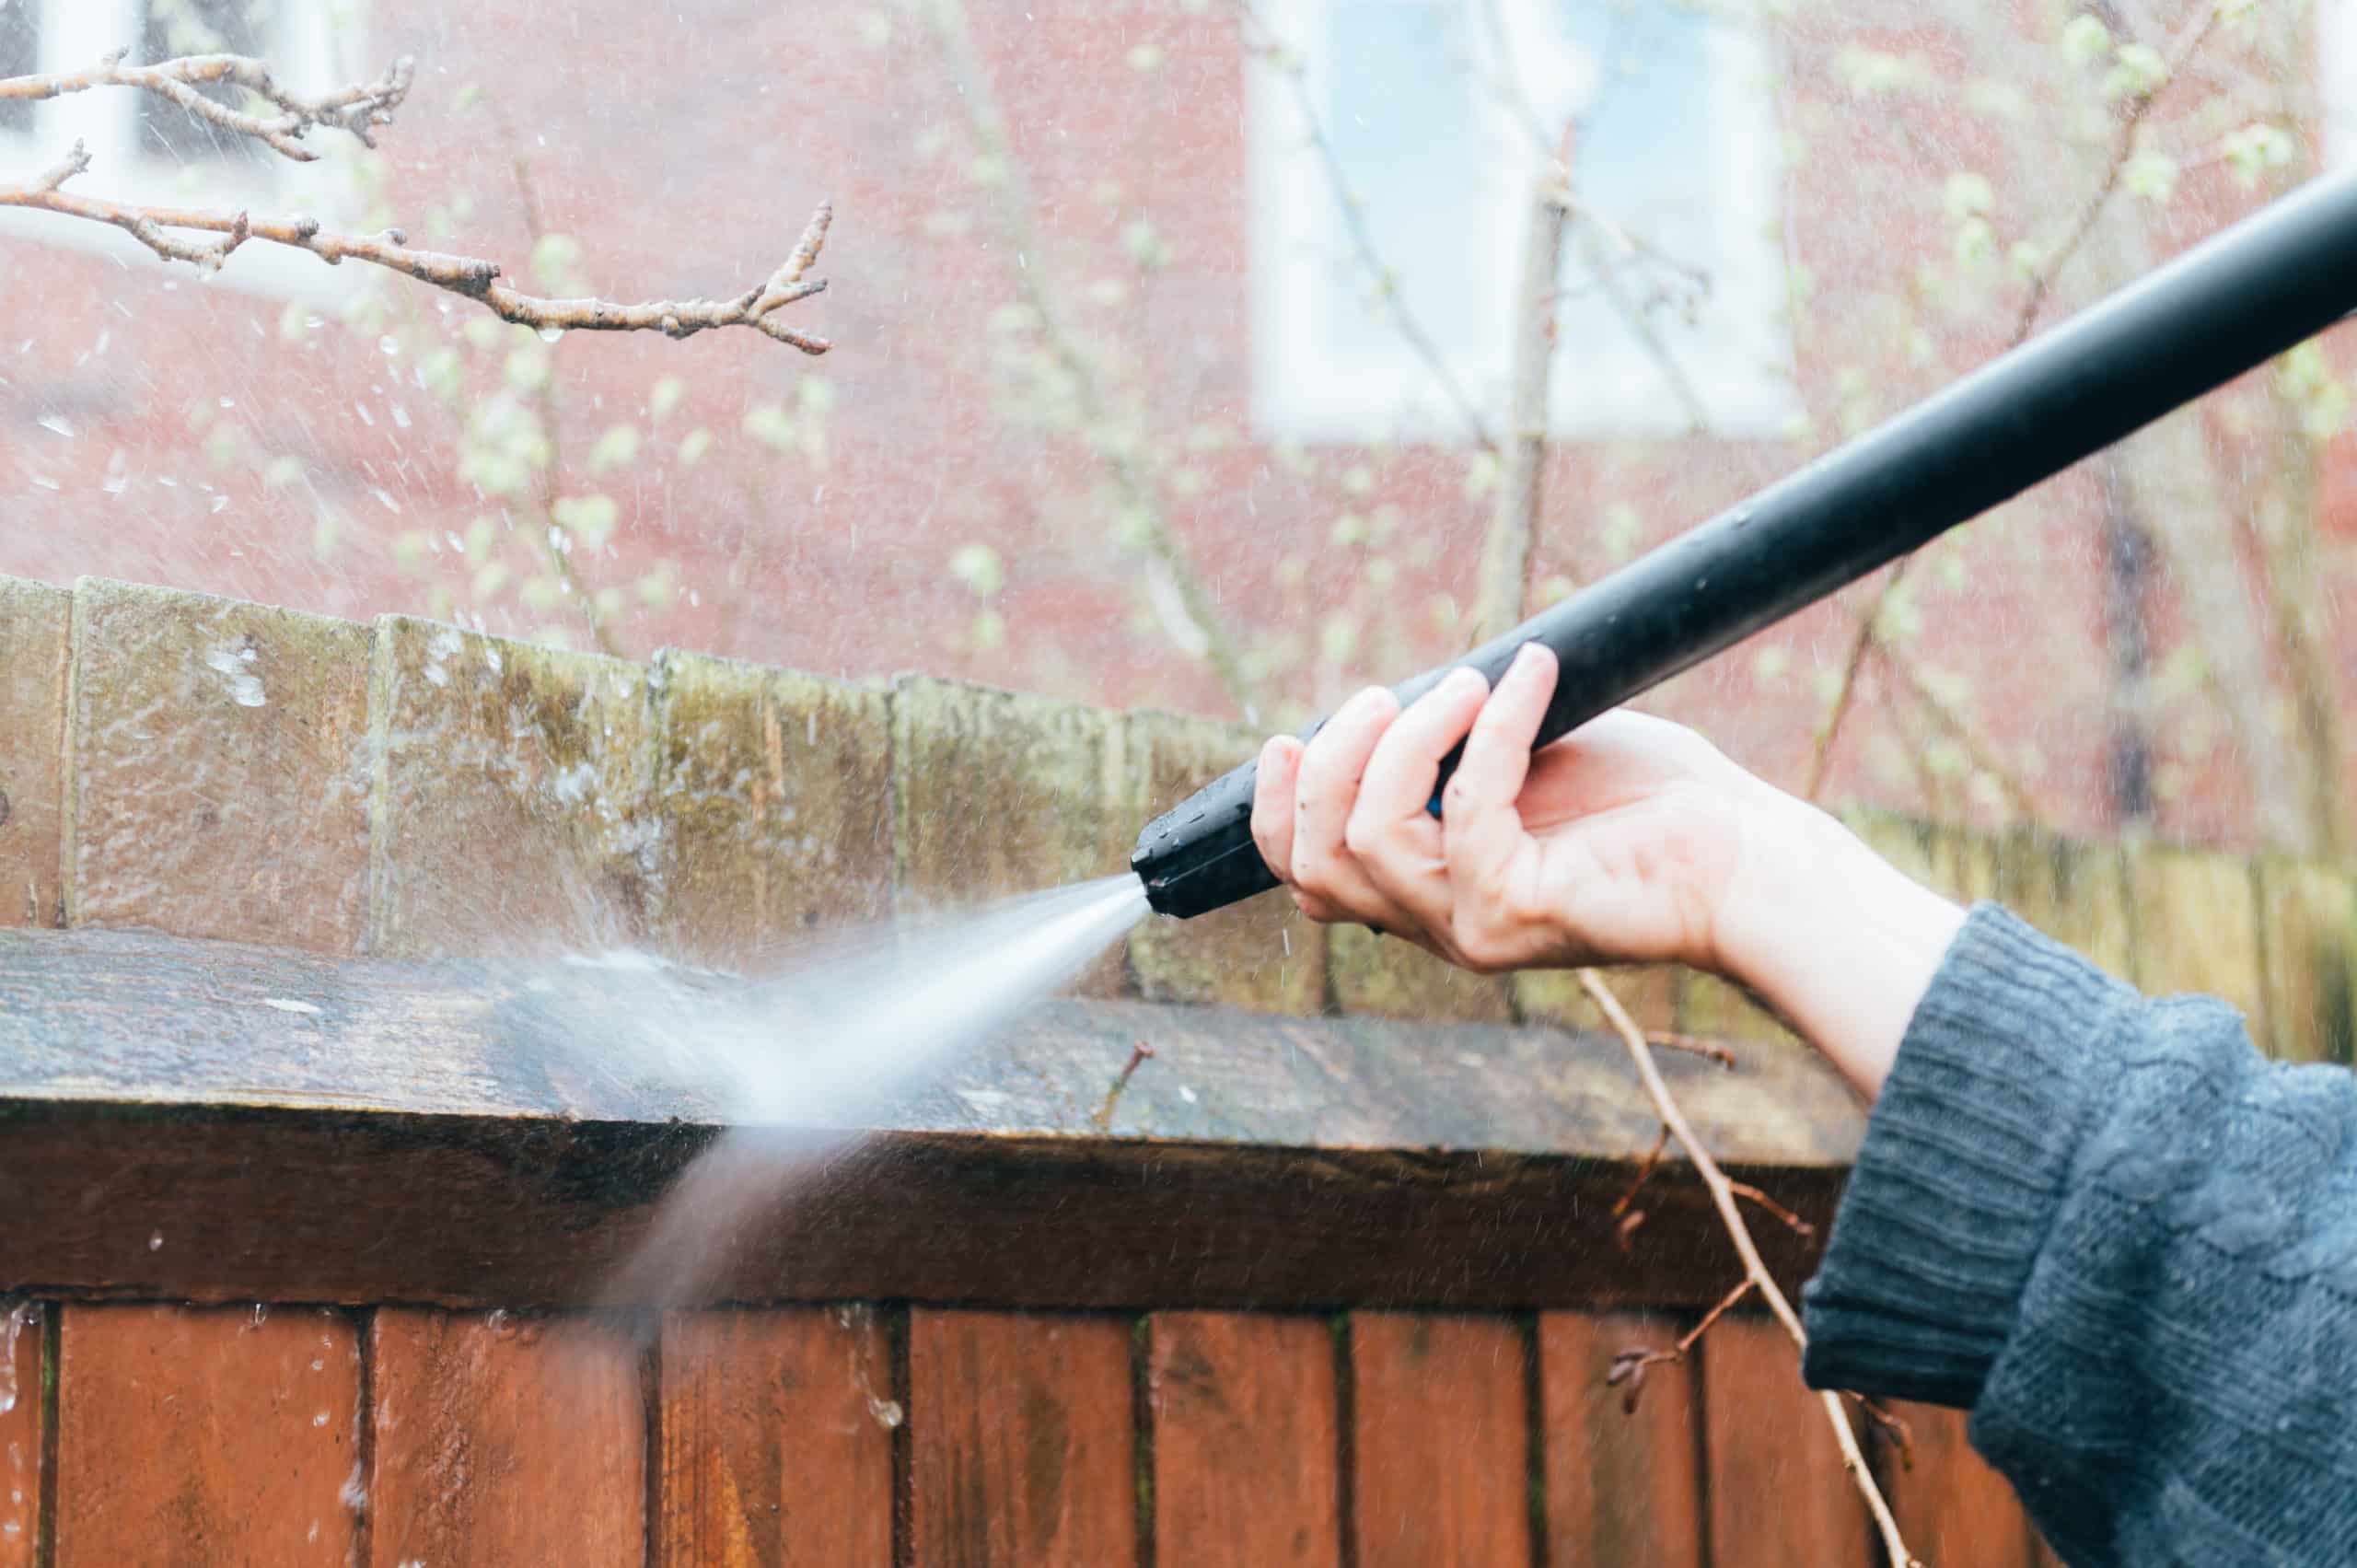 How Can Power Washing Help Your Home for the Winter